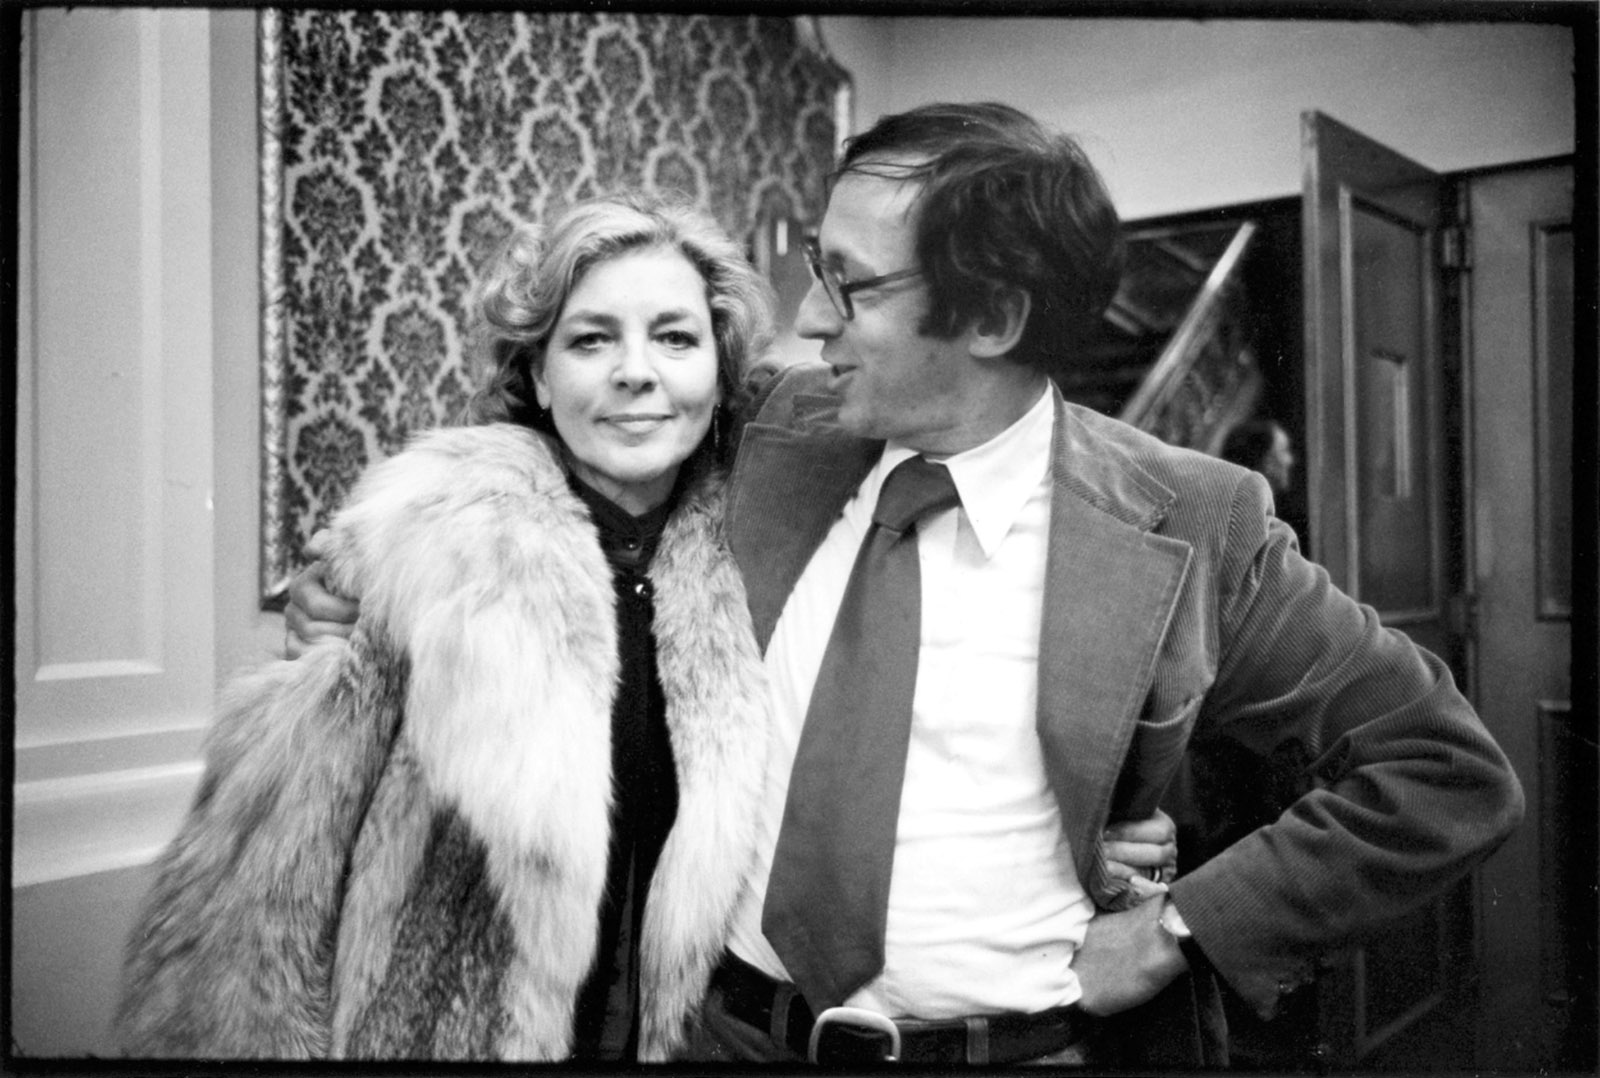 Lauren Bacall and Robert Gottlieb celebrating the publication of Bacall’s memoir, By Myself, which Gottlieb edited, New York City, January 1979